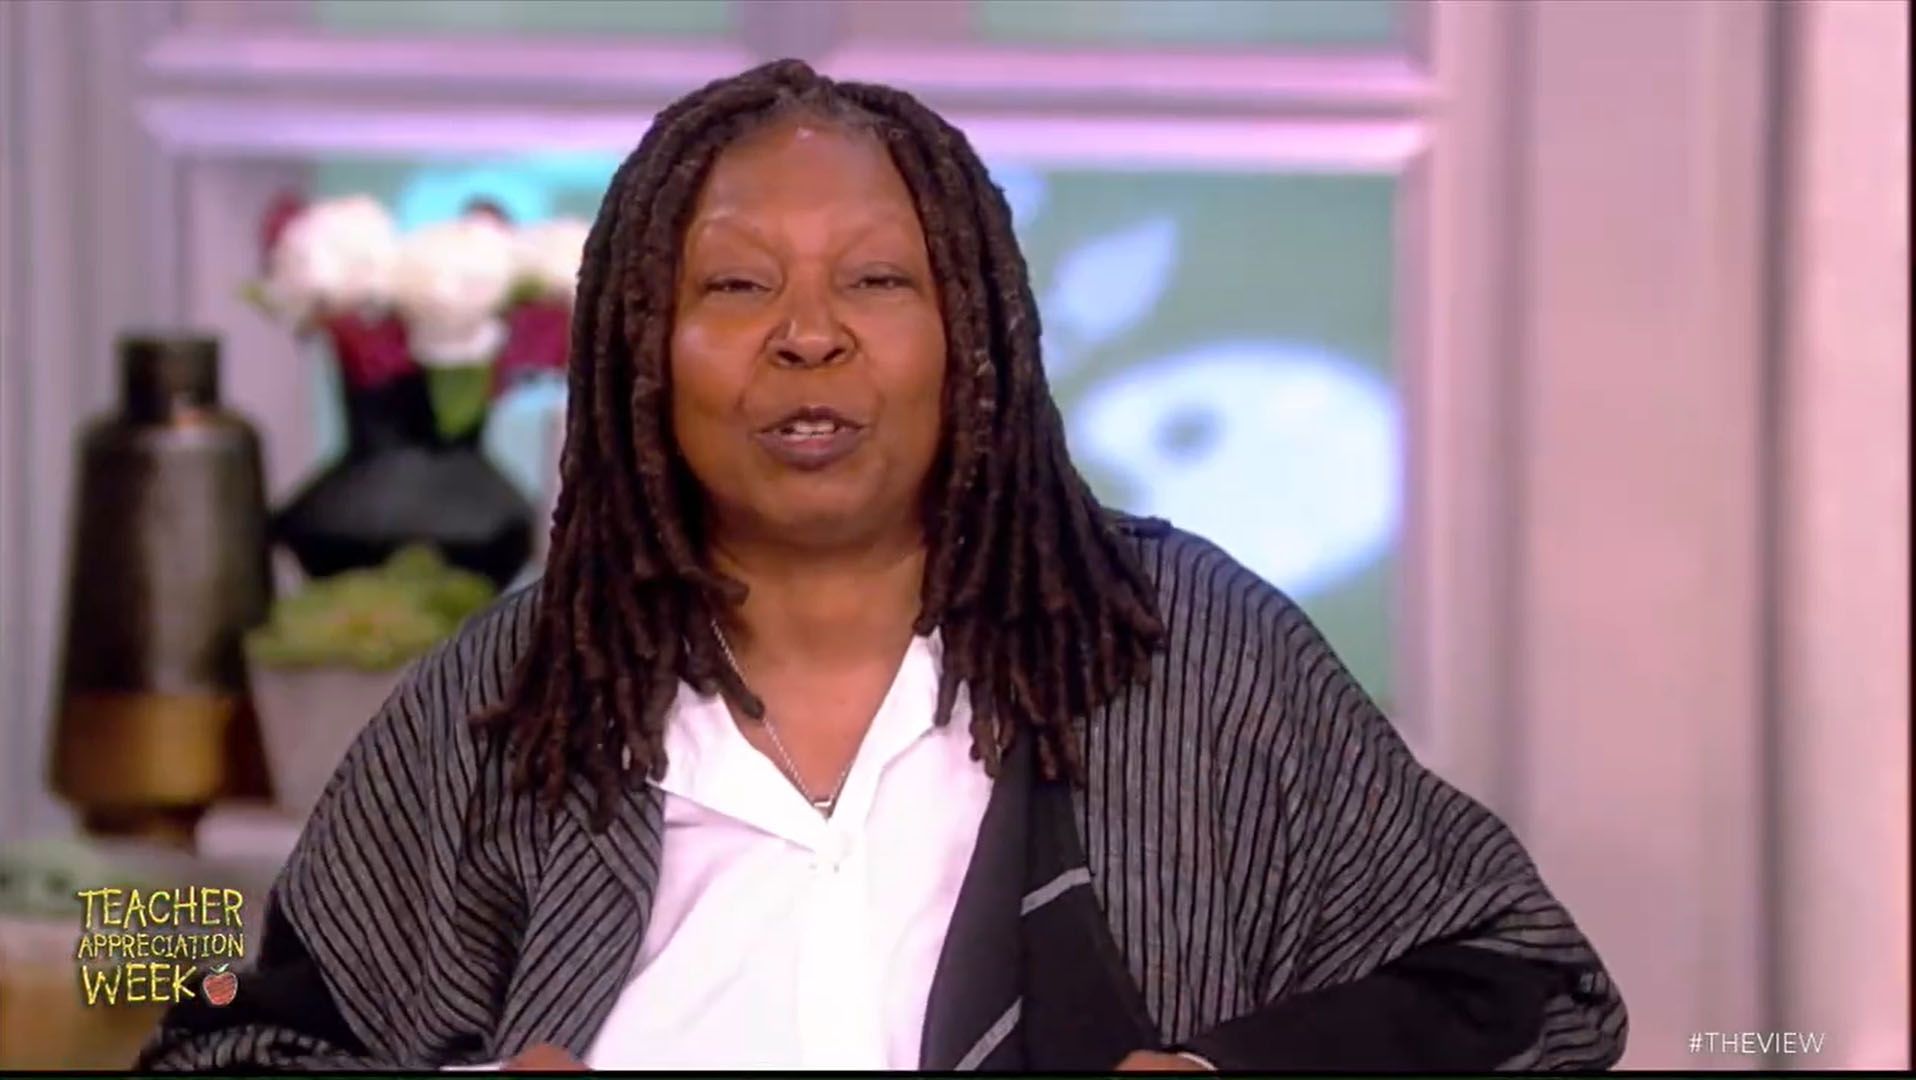 Whoopi Goldberg’s Controversial Behavior Ruins Special Event